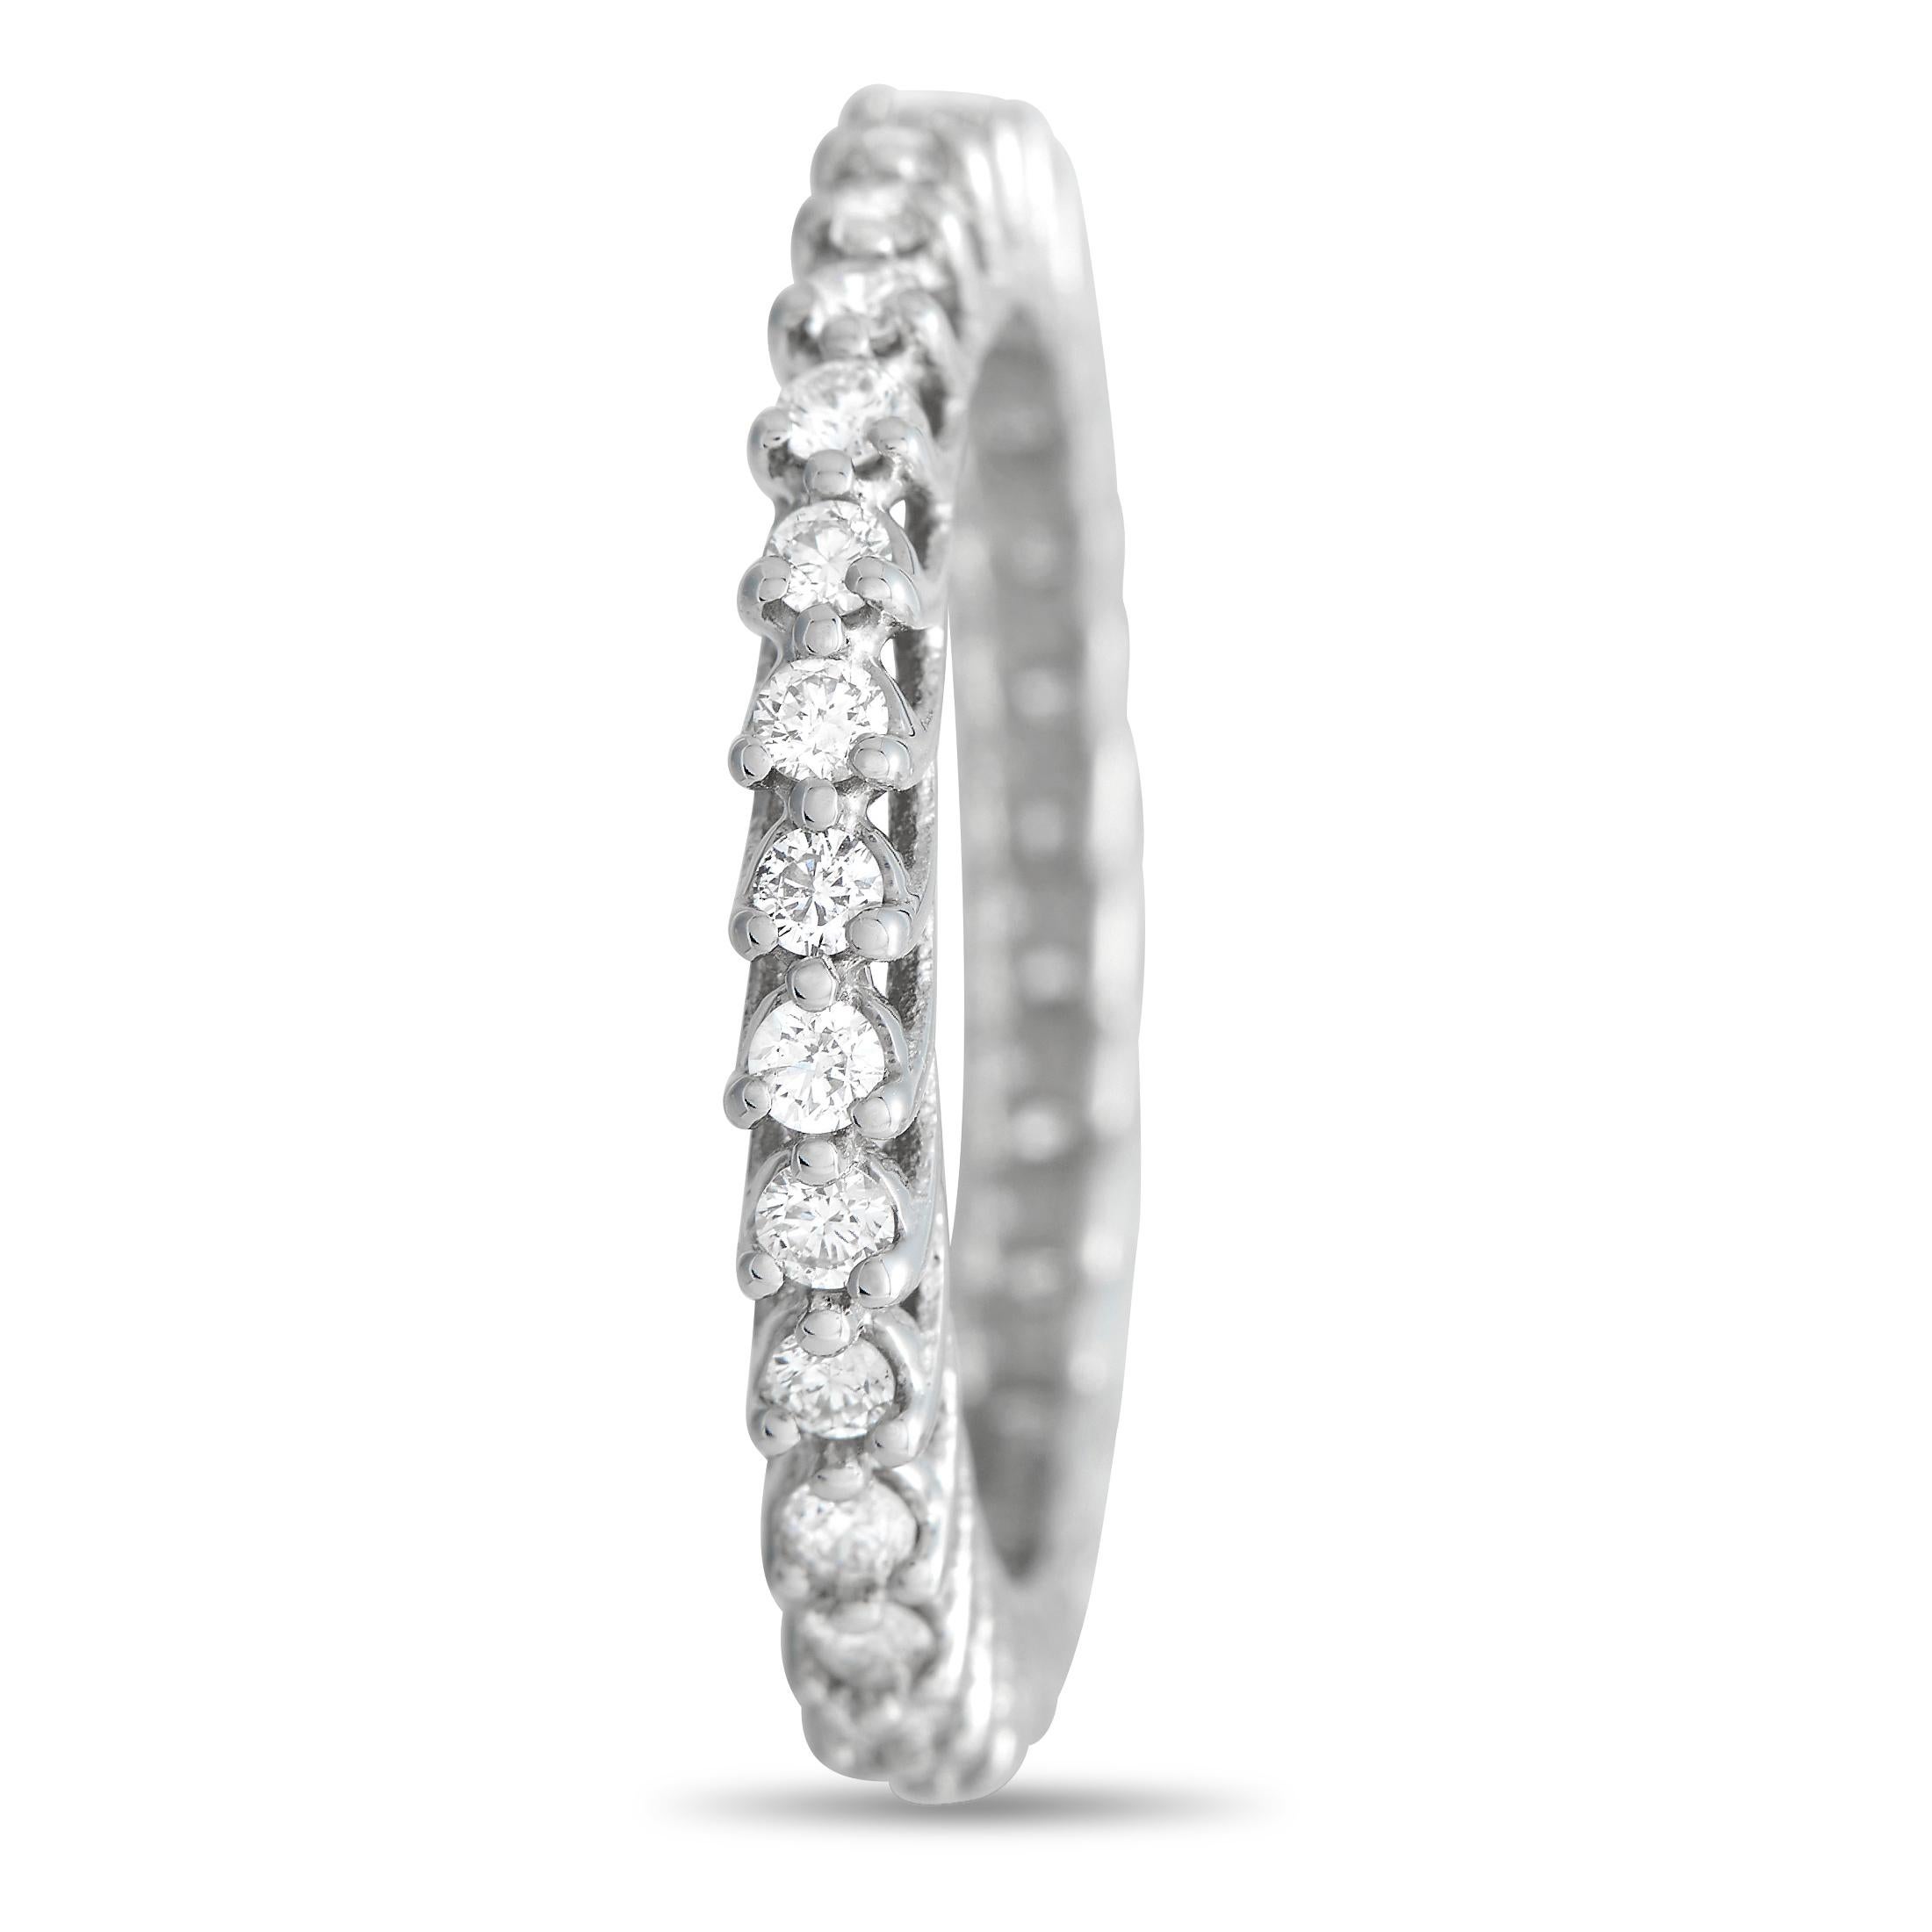 Sparkling diamonds with a total weight of 0.80 carats make this elegant 14K White Gold band ring simply unforgettable. It measures 3mm wide, making it ideal for everyday wear. 
 
 This jewelry piece is offered in brand new condition and includes a